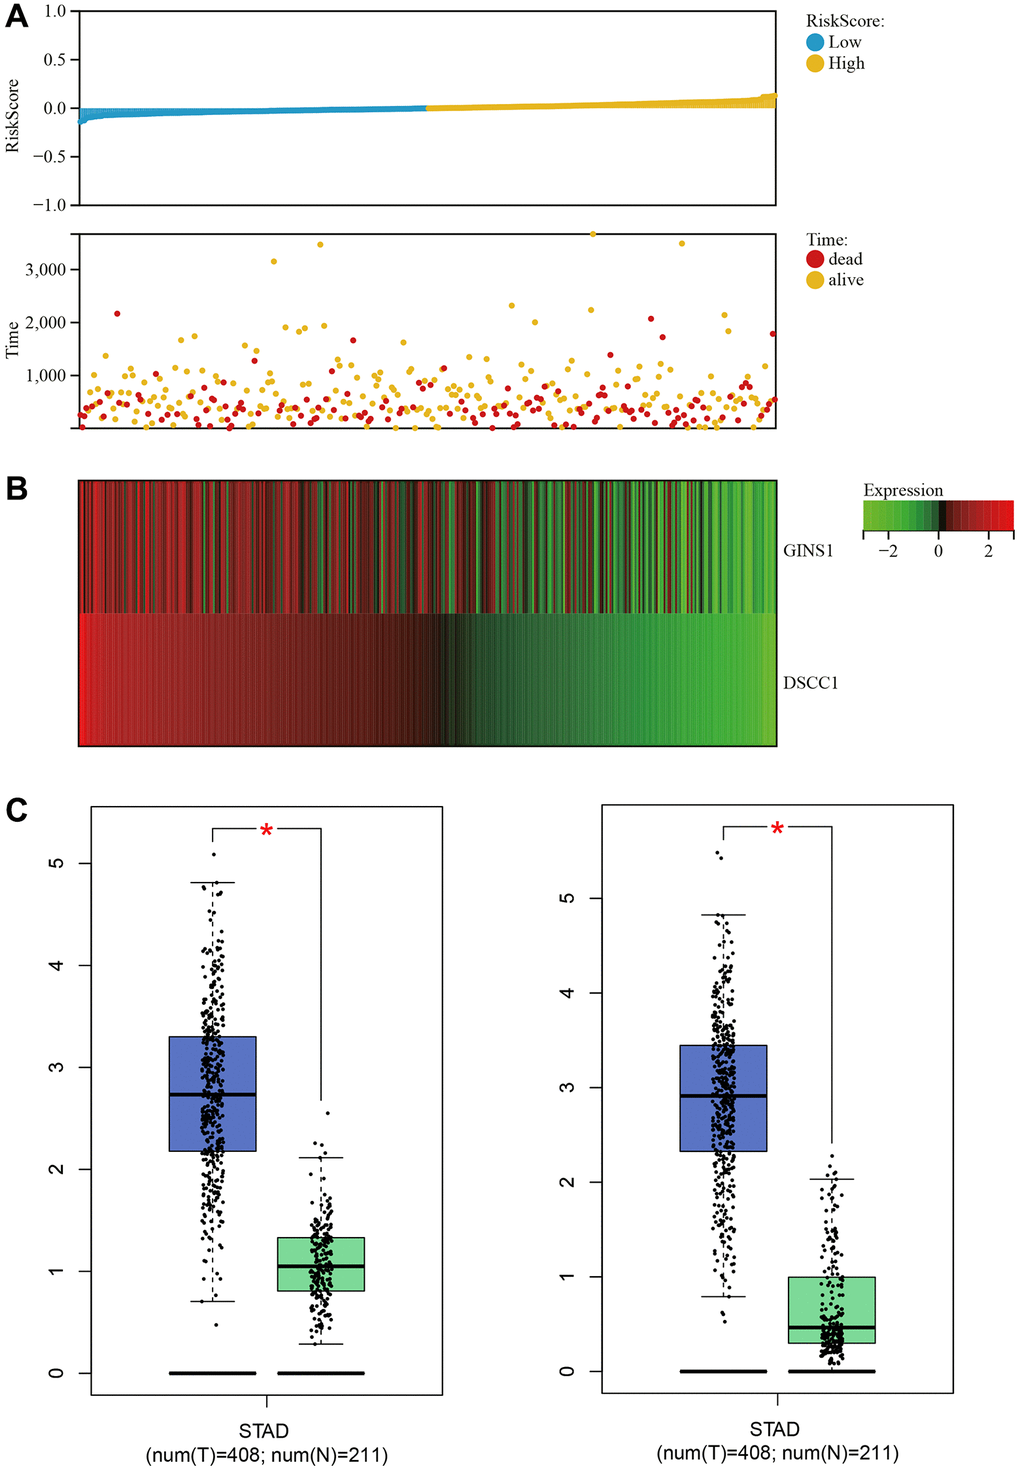 Survival analysis. (A) Relationship graph between prognosis scores. (B) Visualization of core gene expression in the gastric cancer survival data heatmap. (C) Boxplot results for core gene expression in gastric cancer.